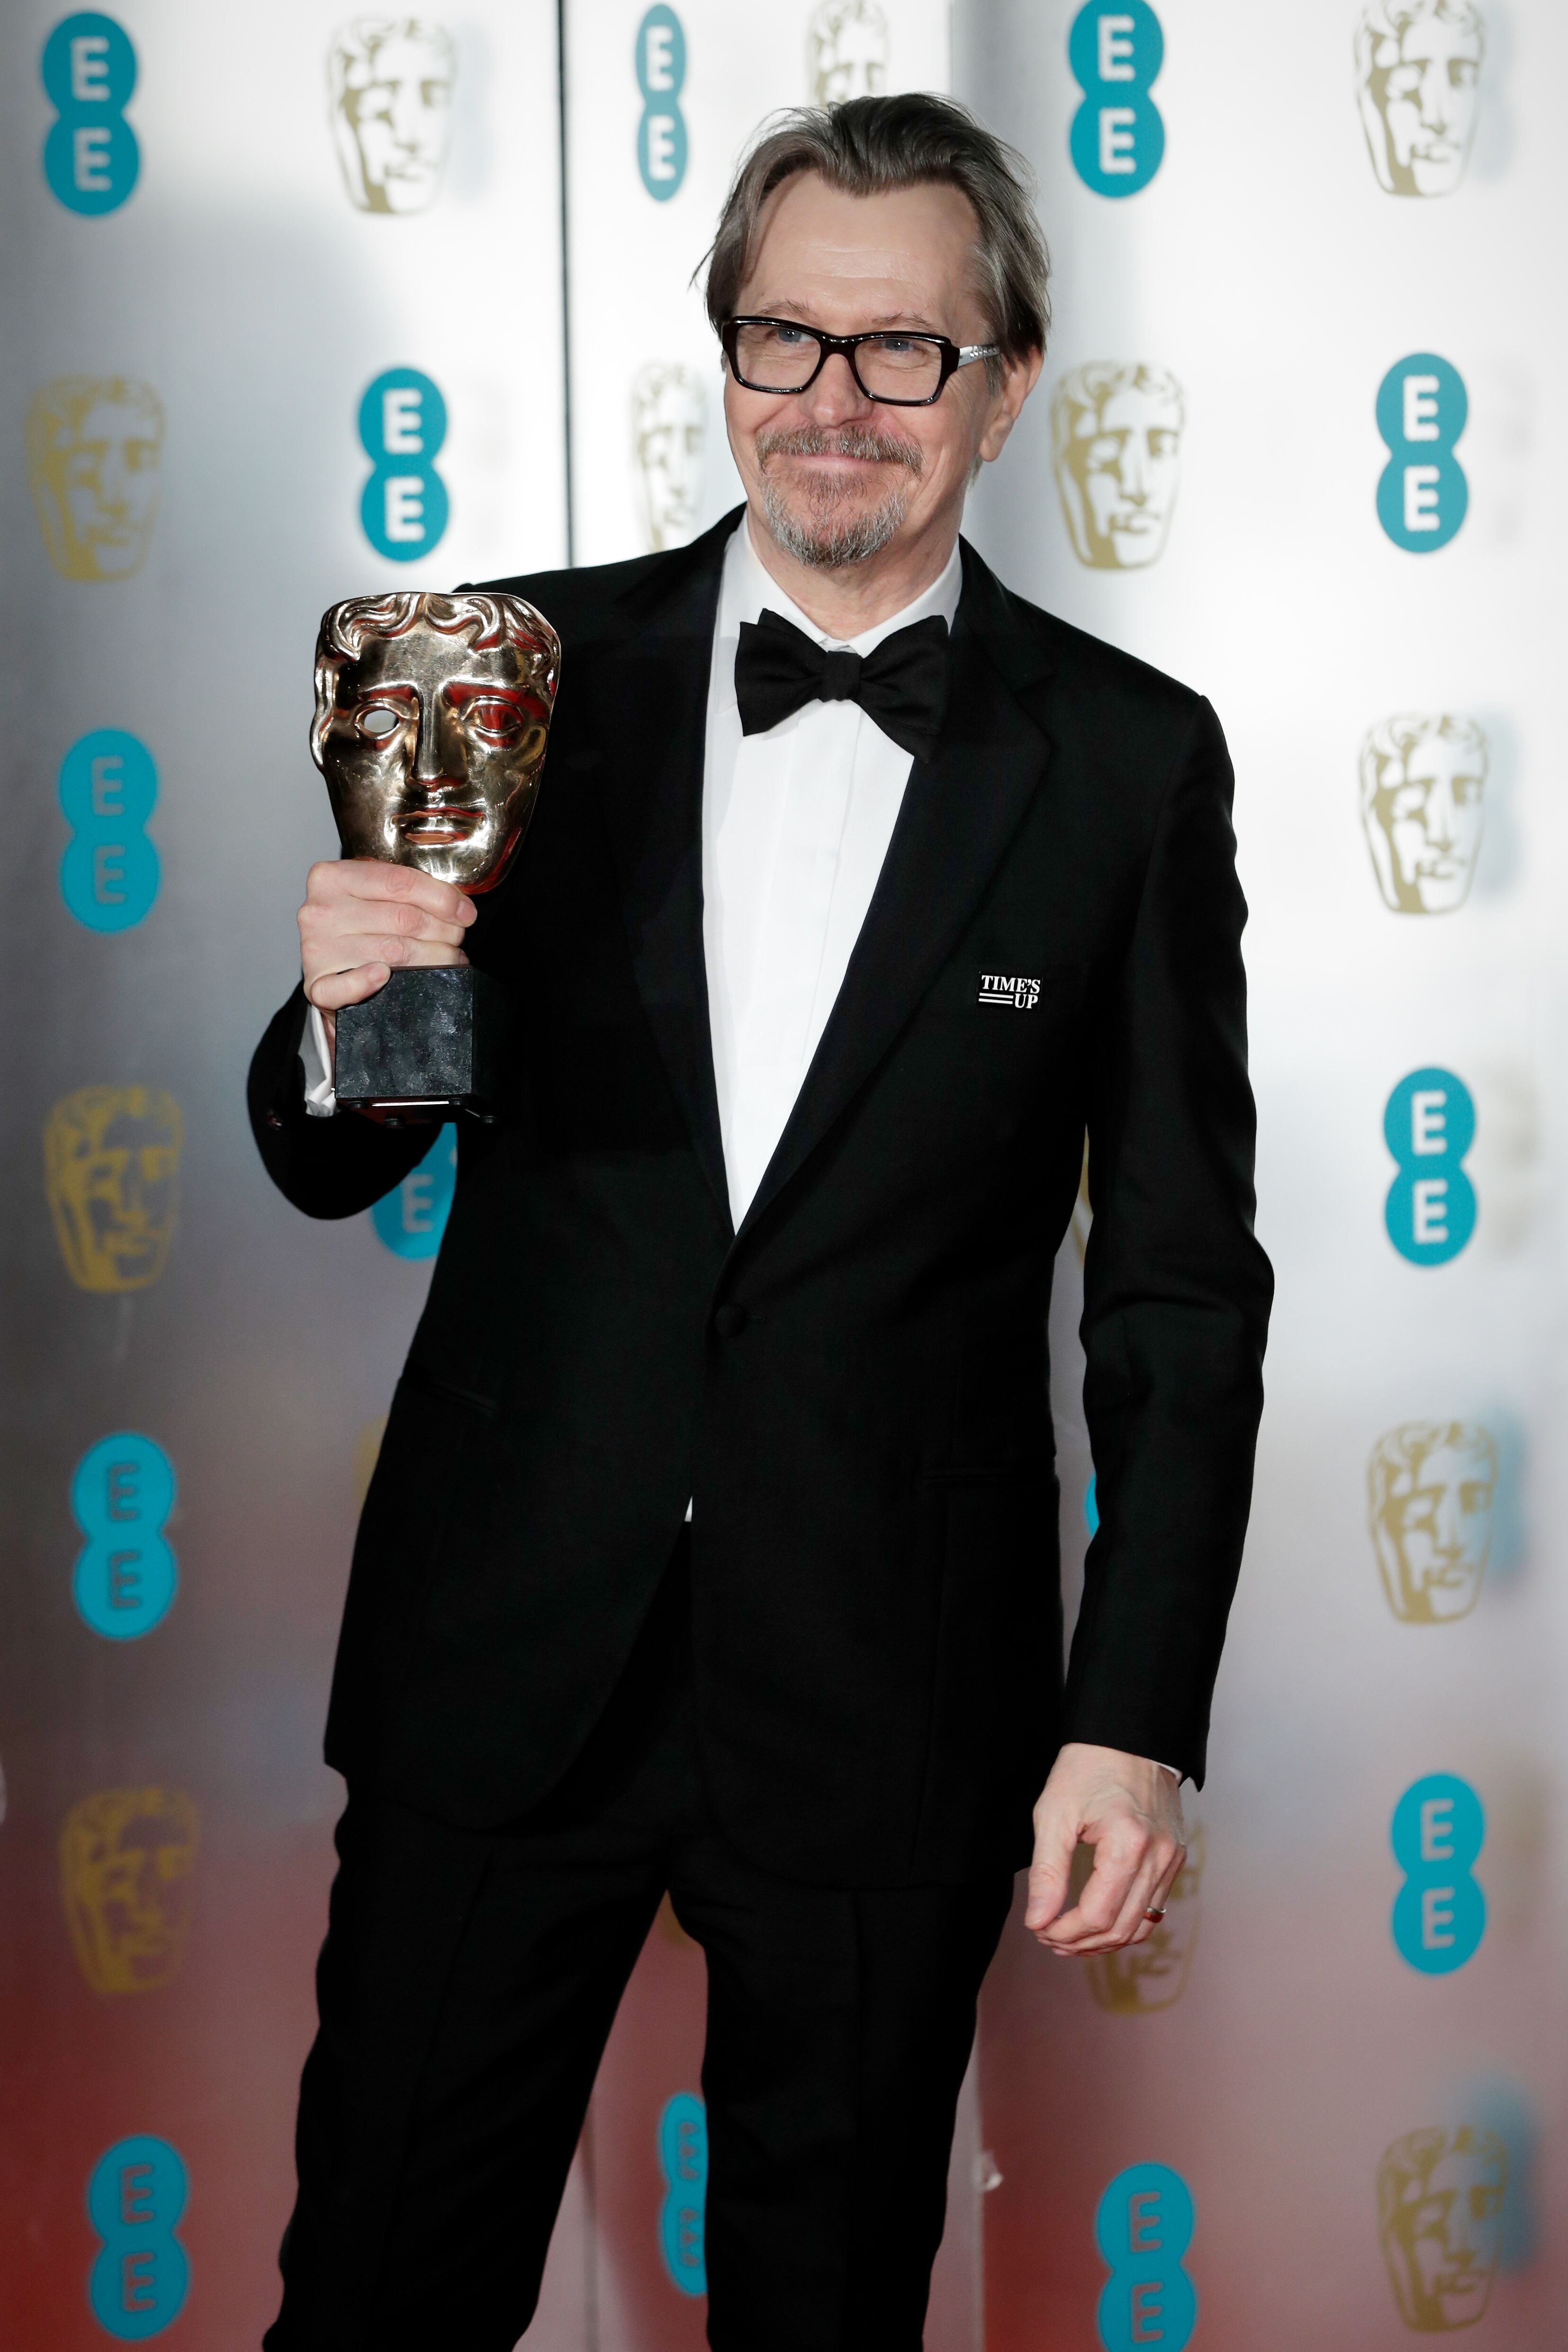 Gary Oldman attends the EE British Academy Film Awards. | Source: Getty Images